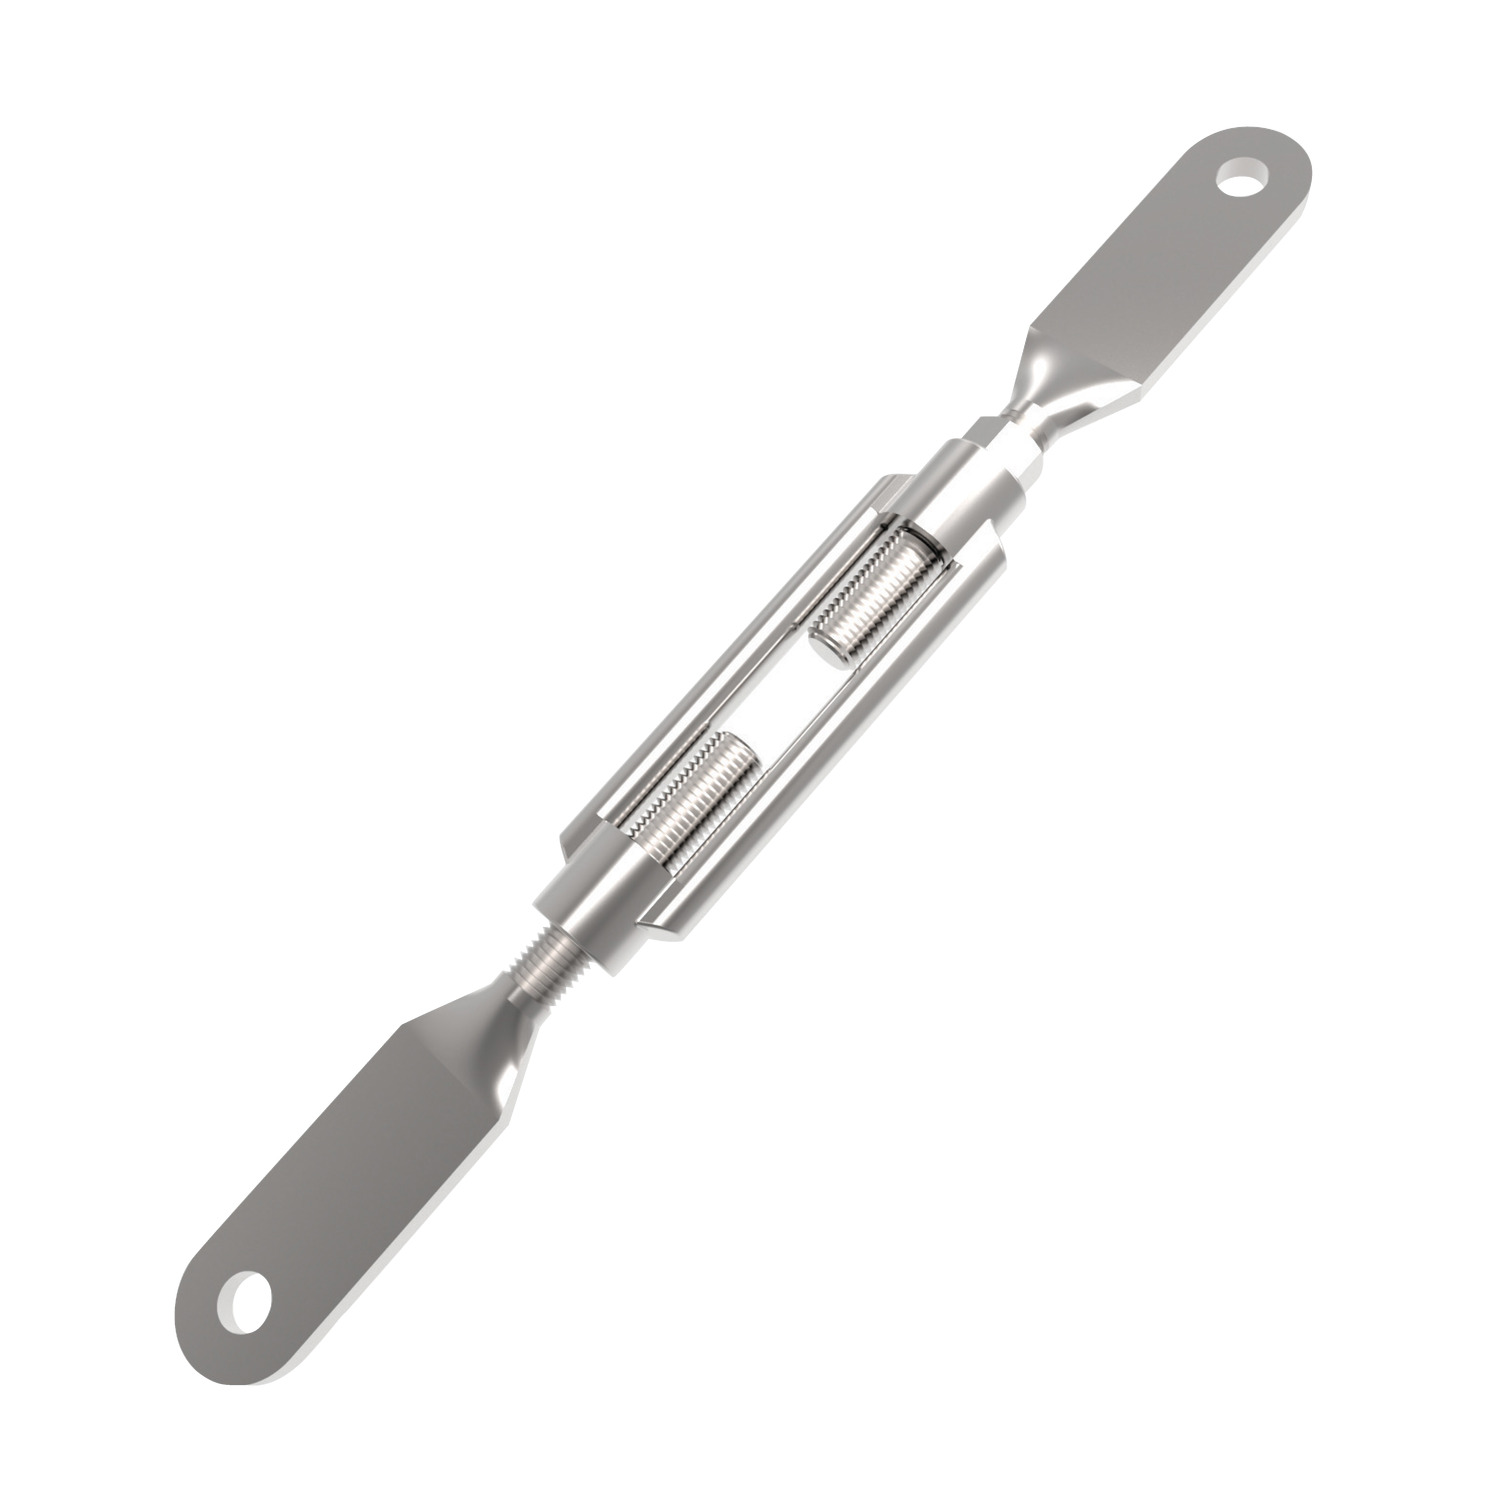 Plain End Turnbuckles Steel turnbuckles with hook and eye pipe body. Manufactured to DIN 1478. Sizes ranging from M6 to M36. Lengths from 110mm to 295mm.